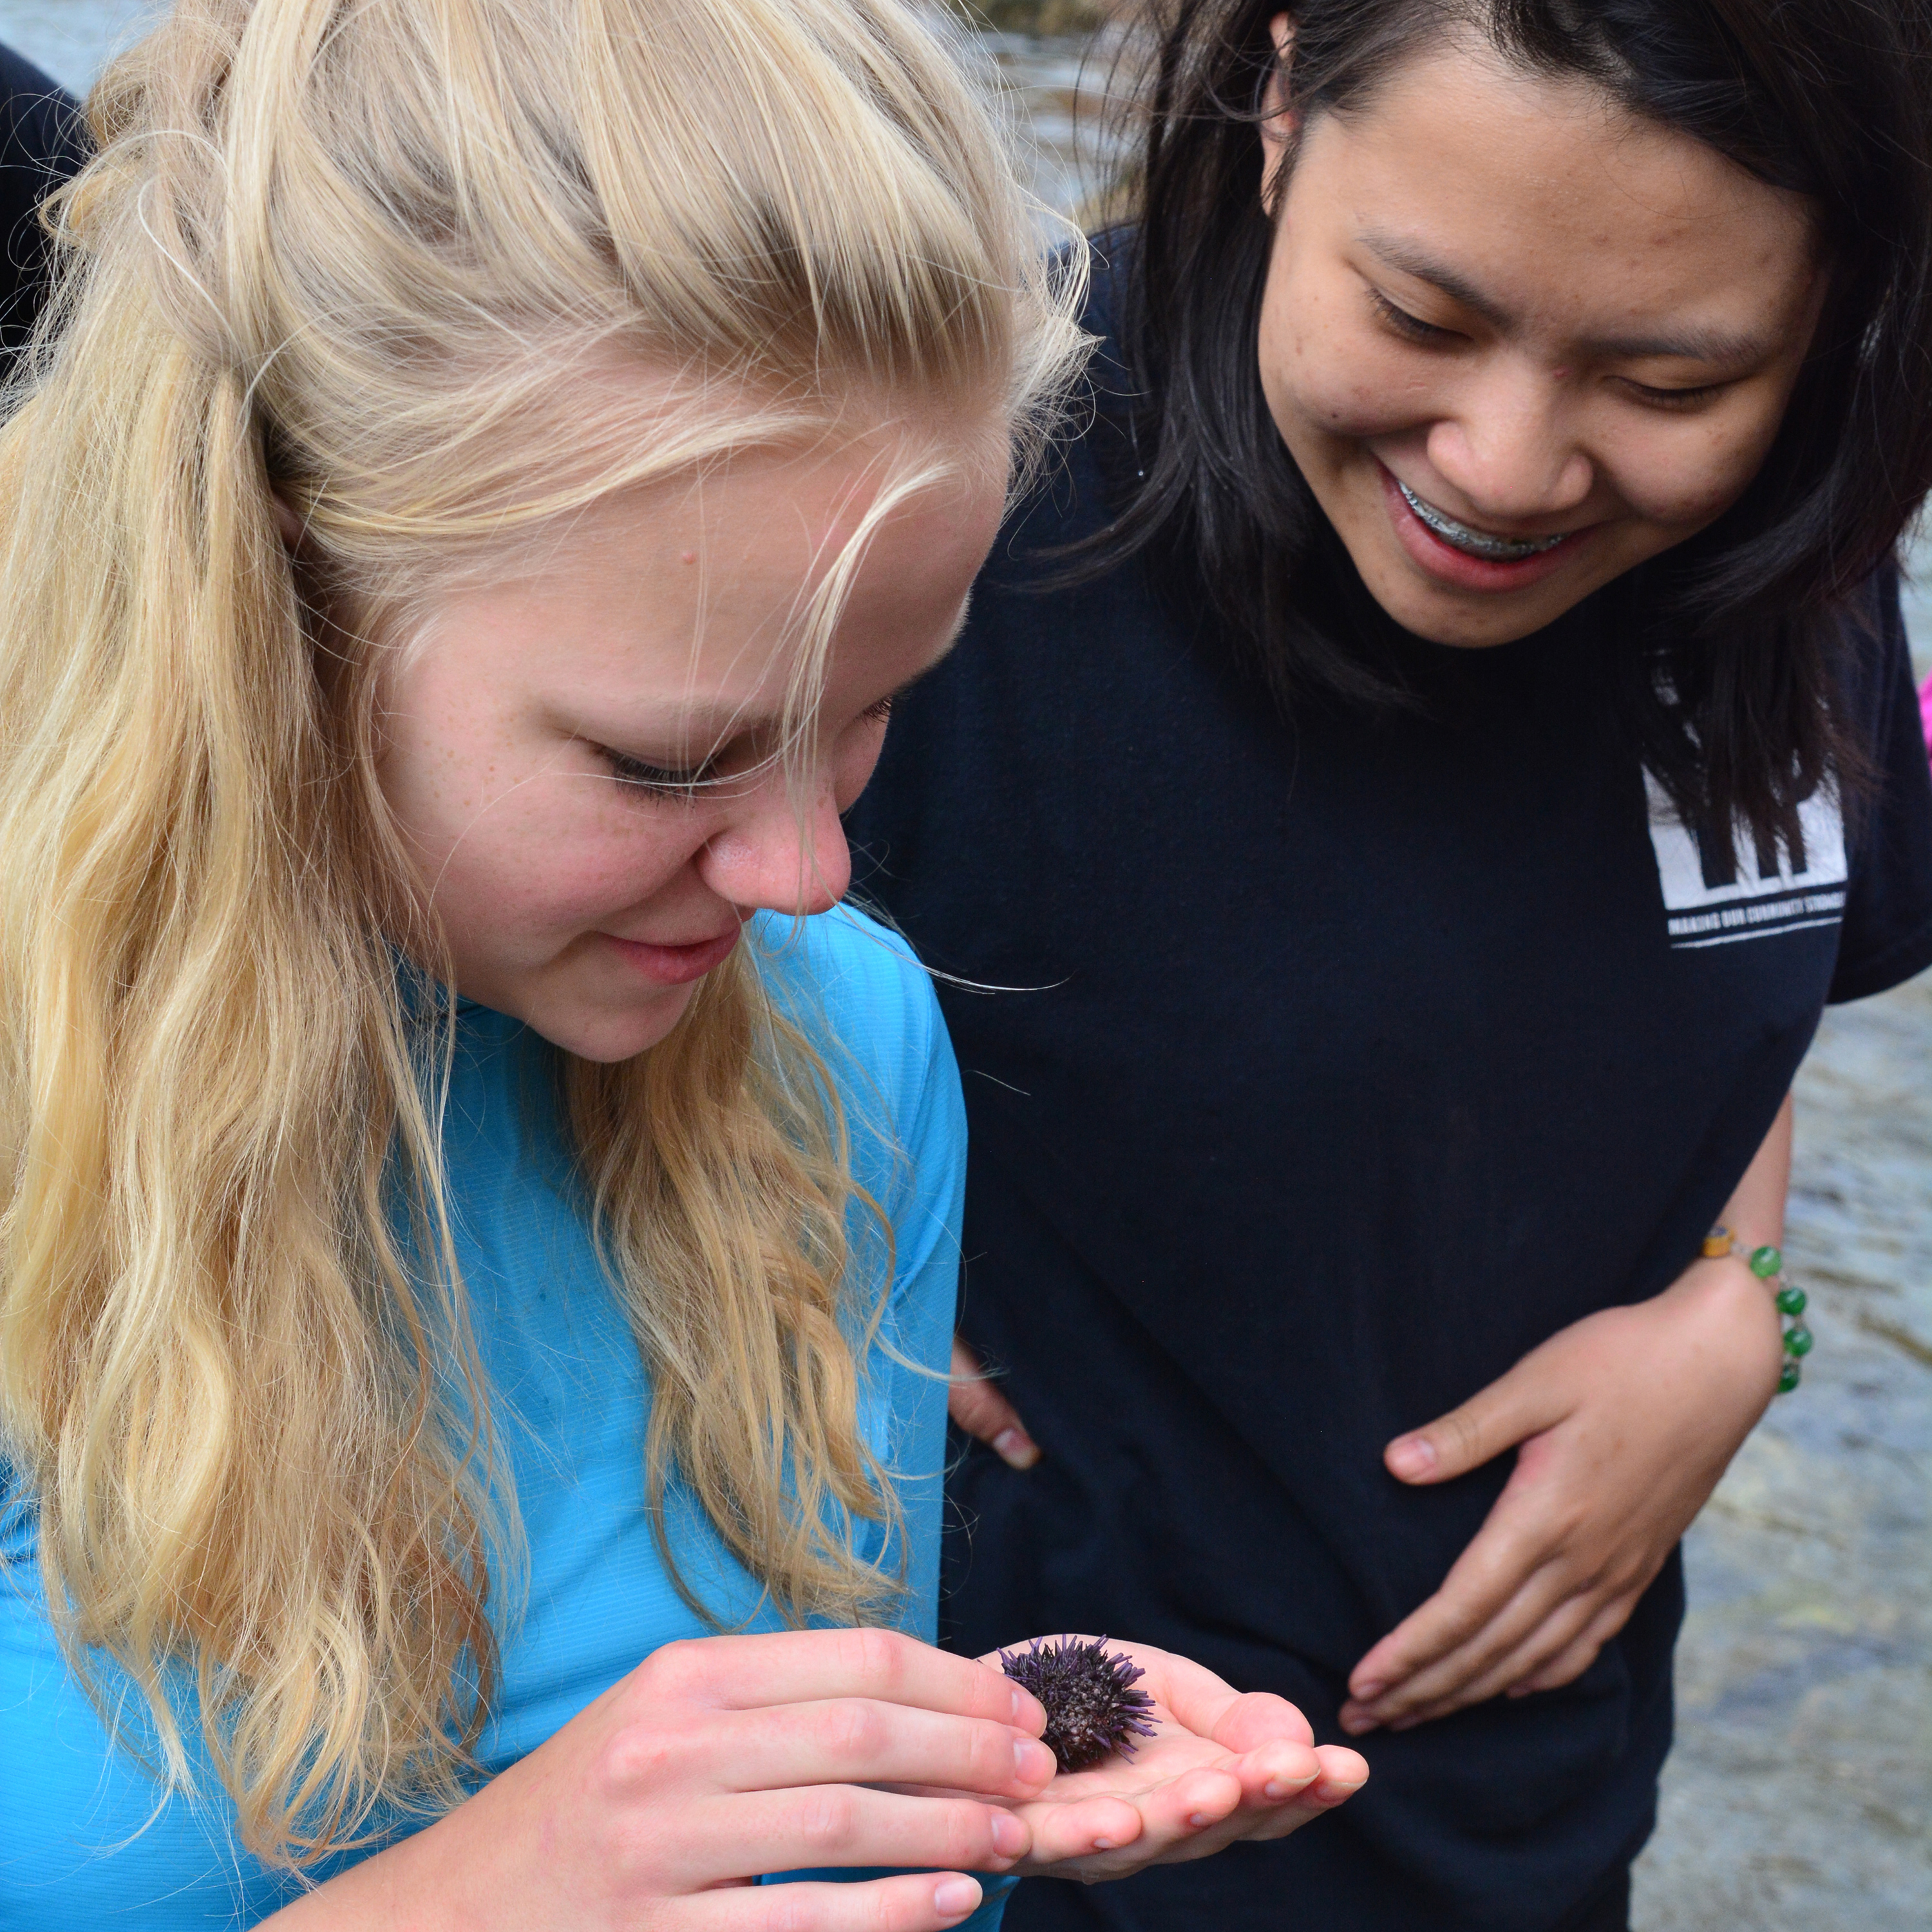 This fellowship empowers female-identifying teens to expand their interest in science and technology and to build confidence through hands-on environmental research alongside female experts in the field.